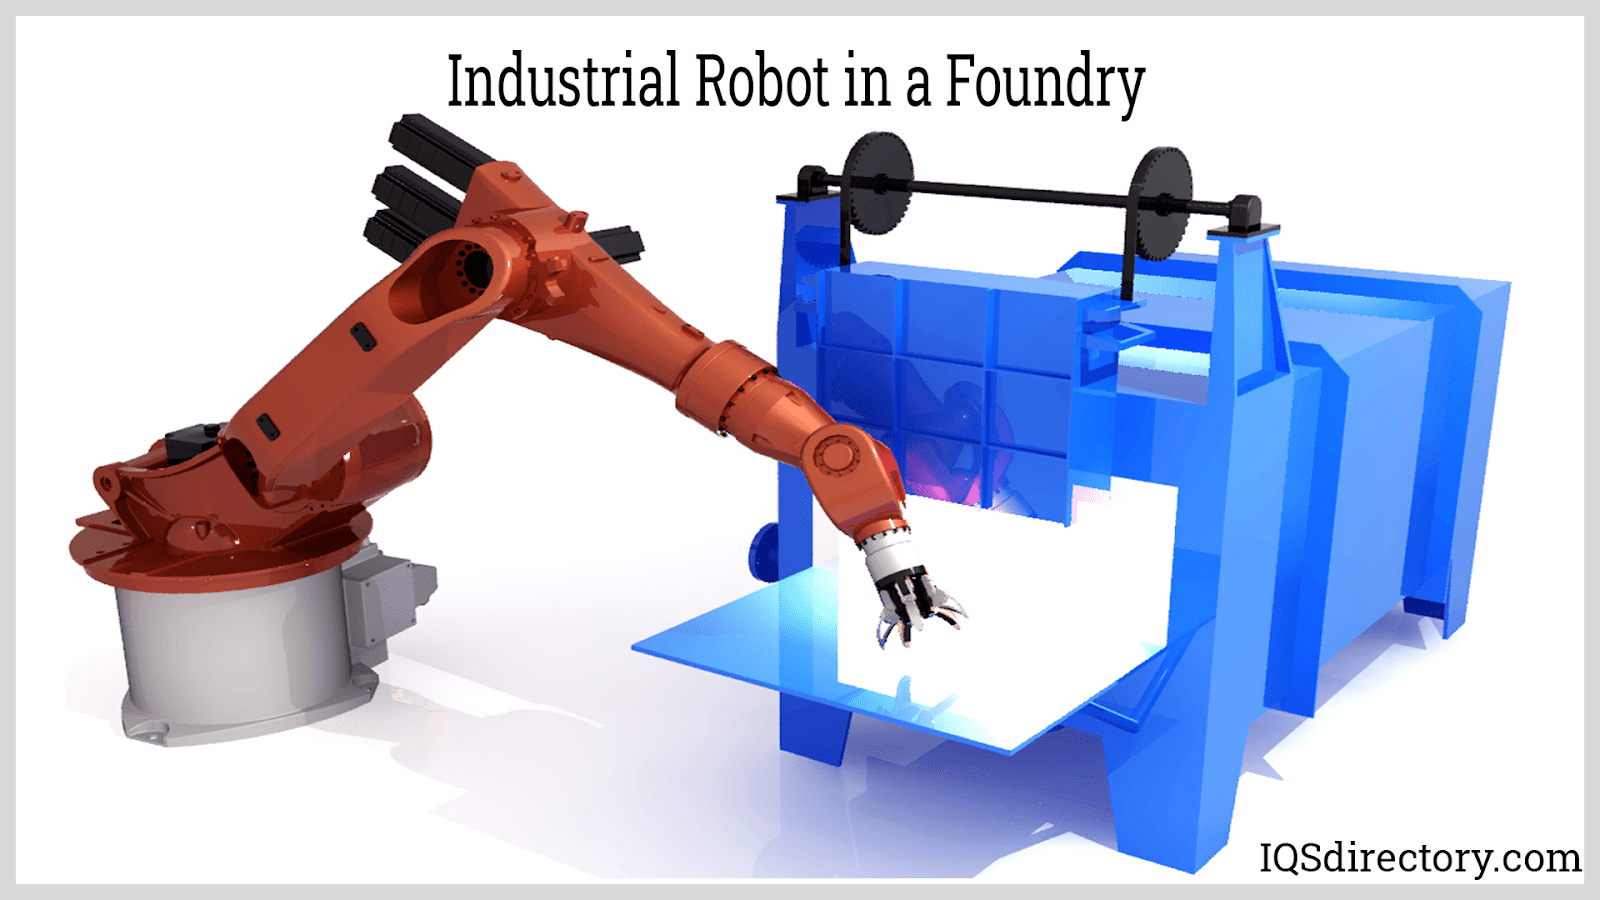 Industrial Robot in a Foundry